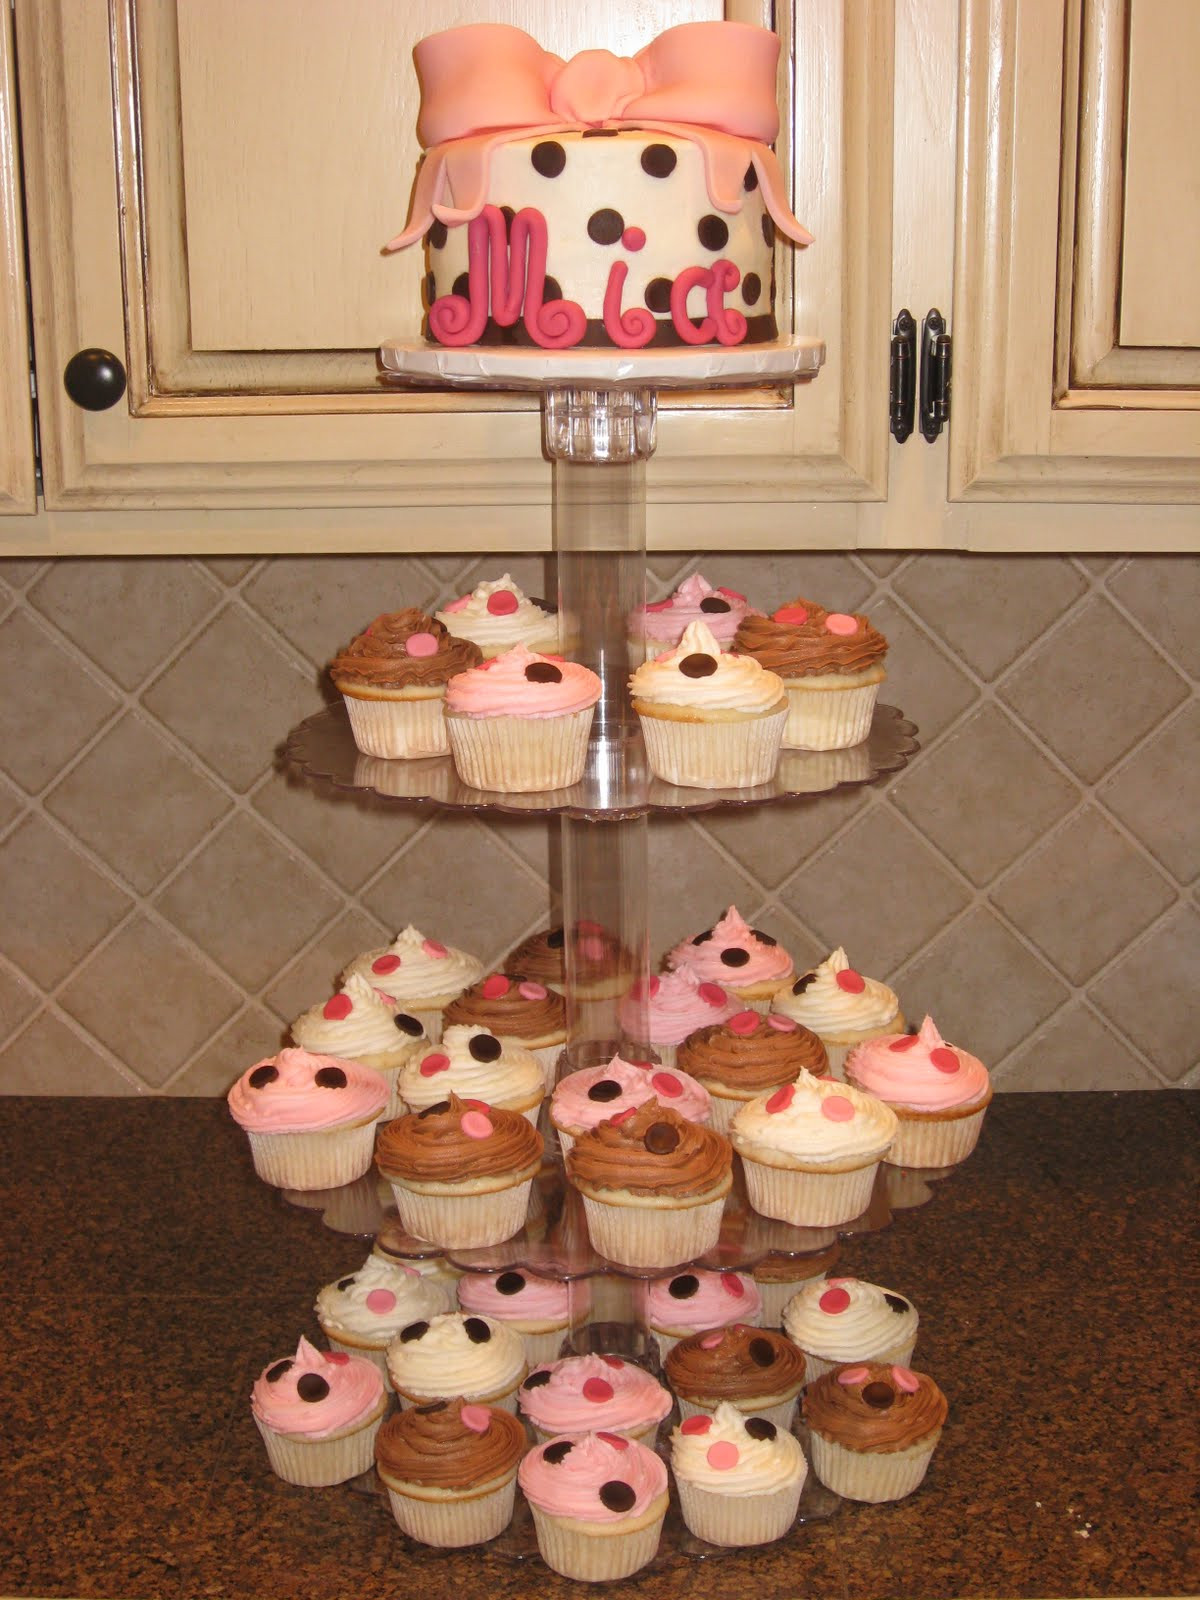 Baby Shower Cakes And Cupcakes
 Shannon s Creative Cakes Baby Shower Cupcake Tower